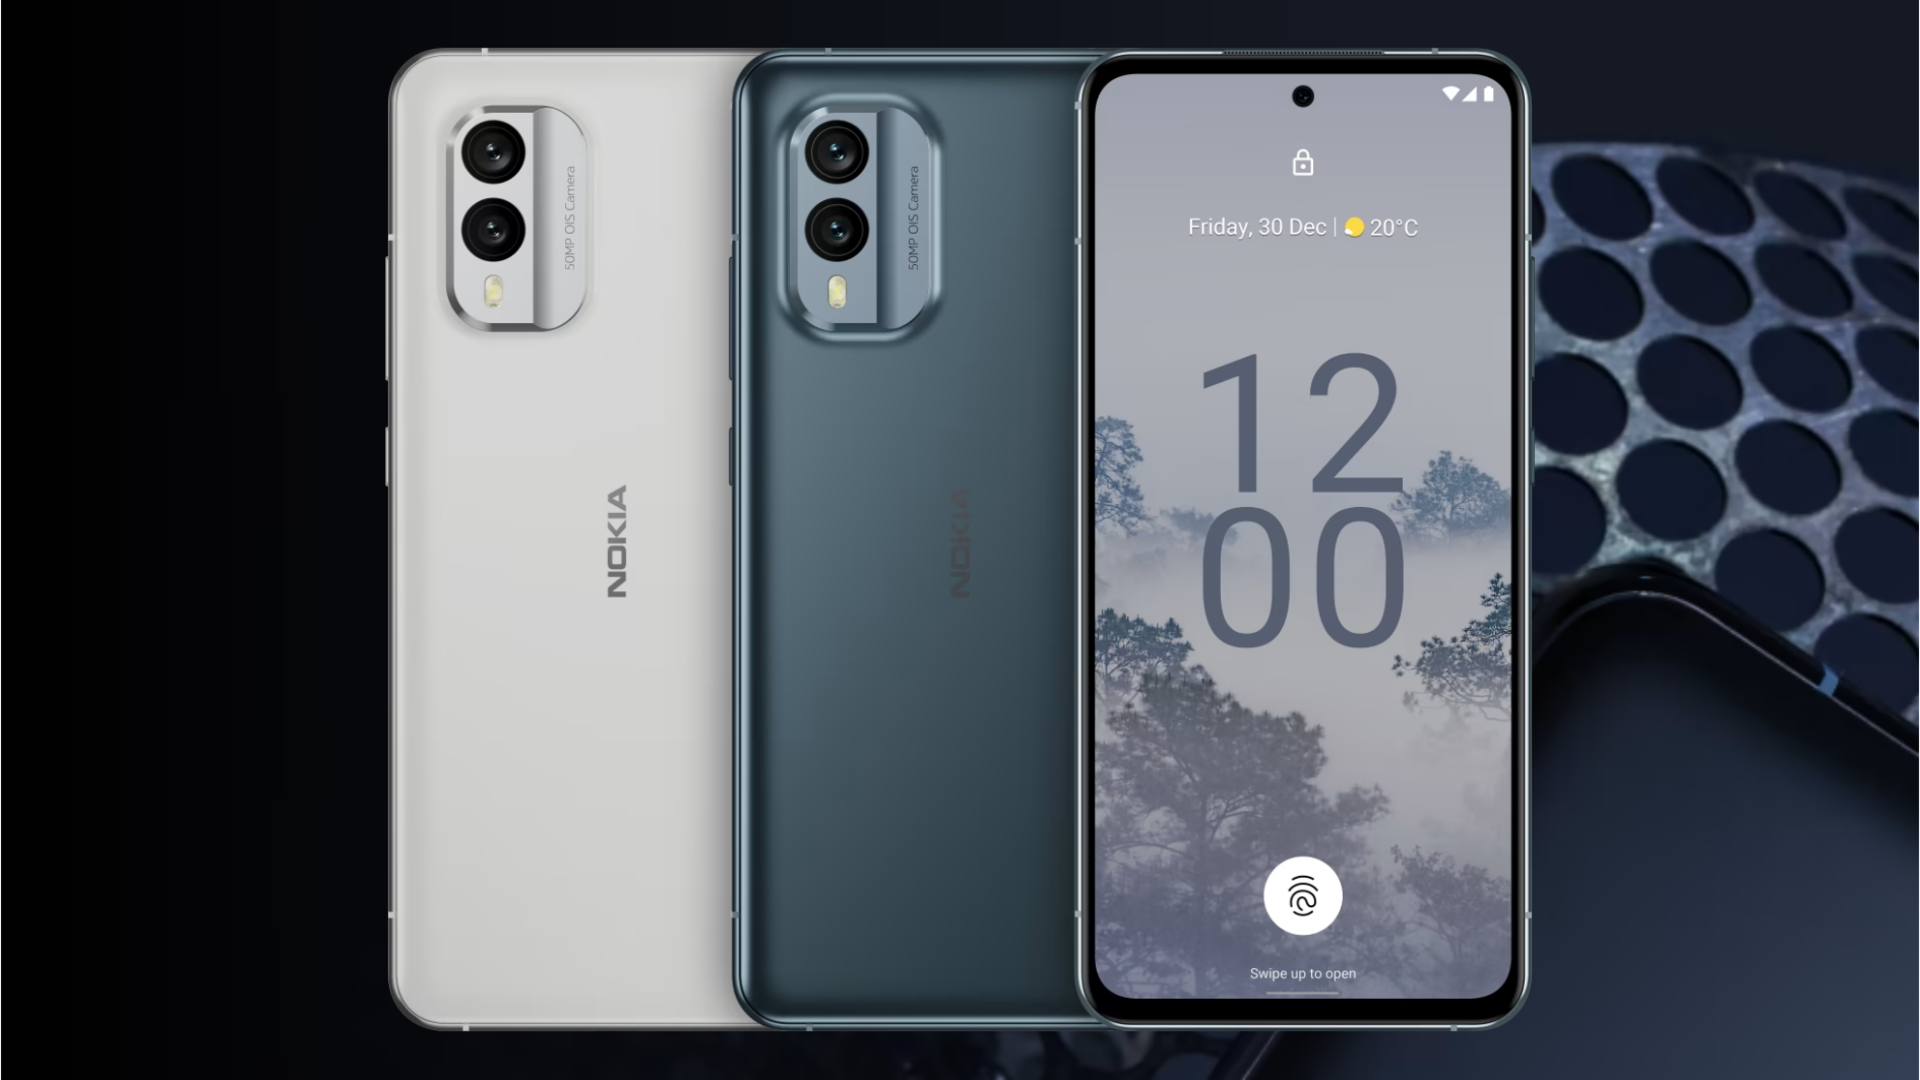 Nokia X30 5G gets Rs. 12,000 price-cut: Should you buy